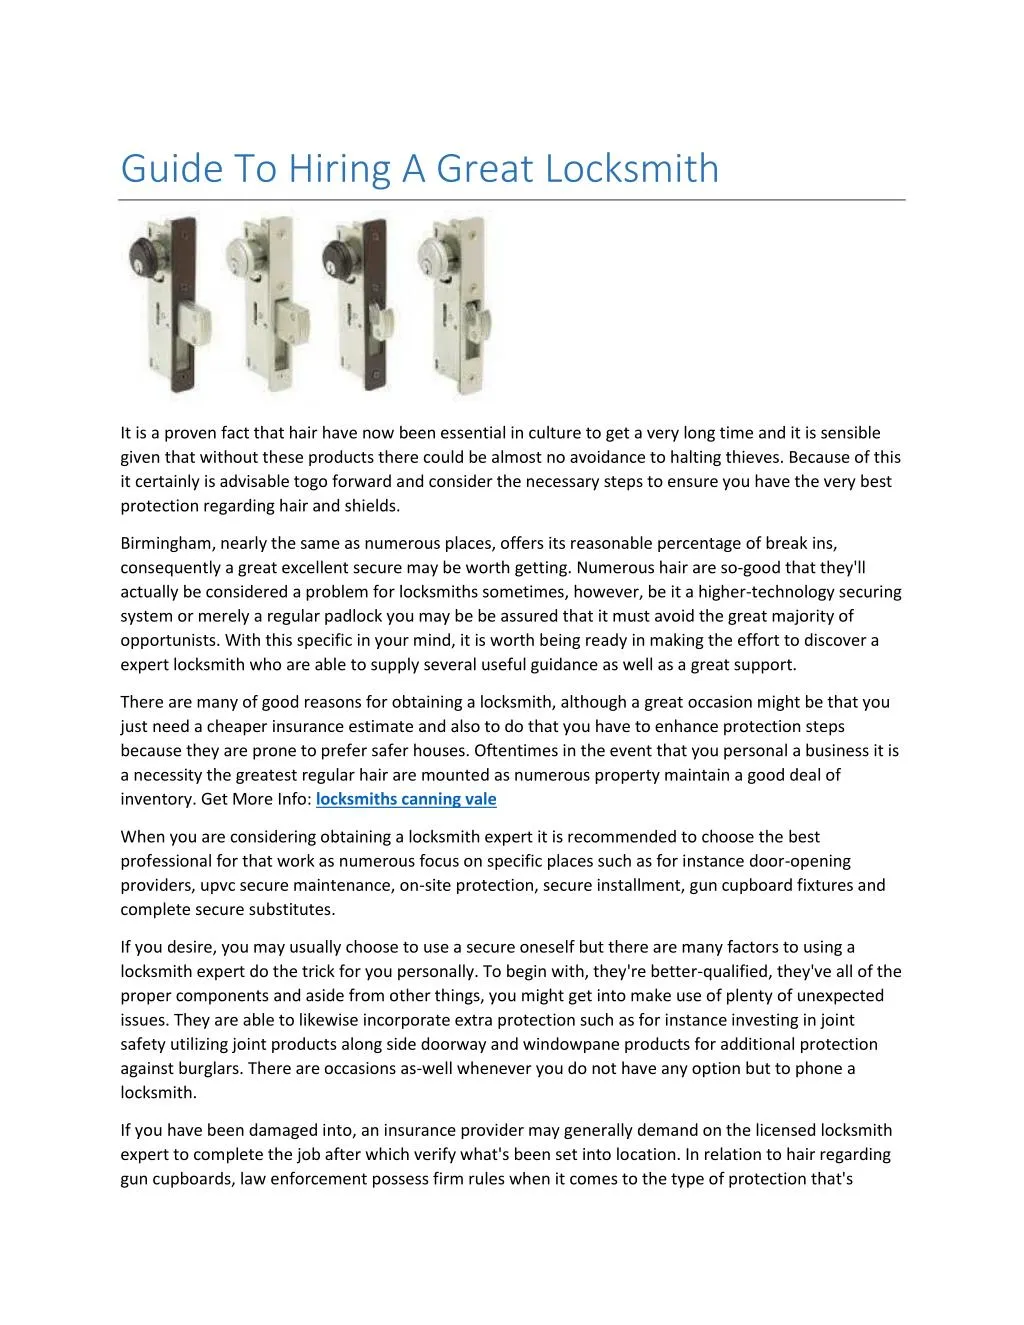 guide to hiring a great locksmith